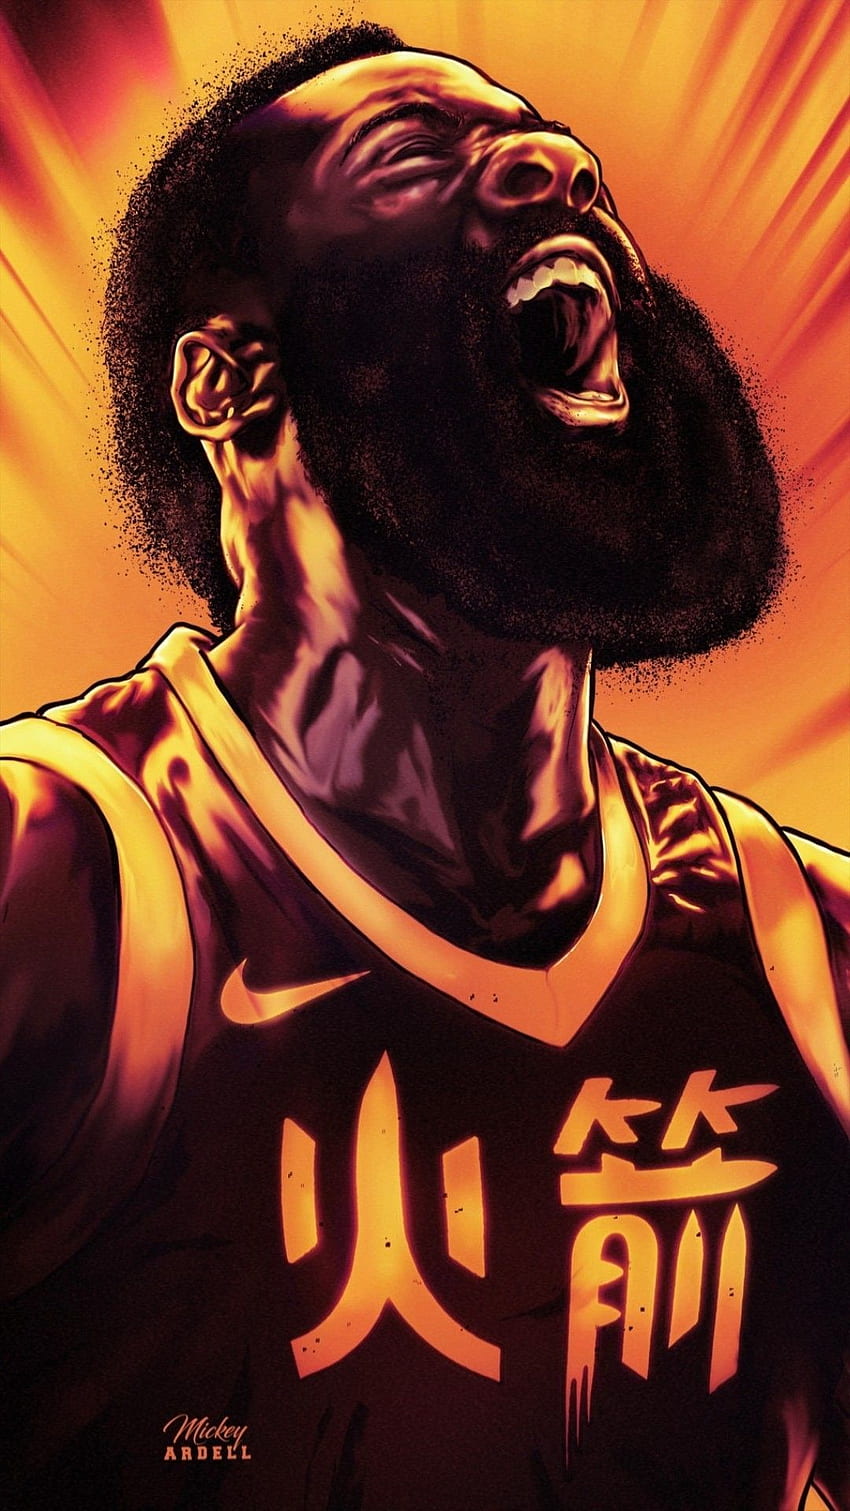 HoopsWallpapers.com – Get the latest HD and mobile NBA wallpapers today!  James Harden Archives - HoopsWallpapers.com - Get the latest HD and mobile  NBA wallpapers today!